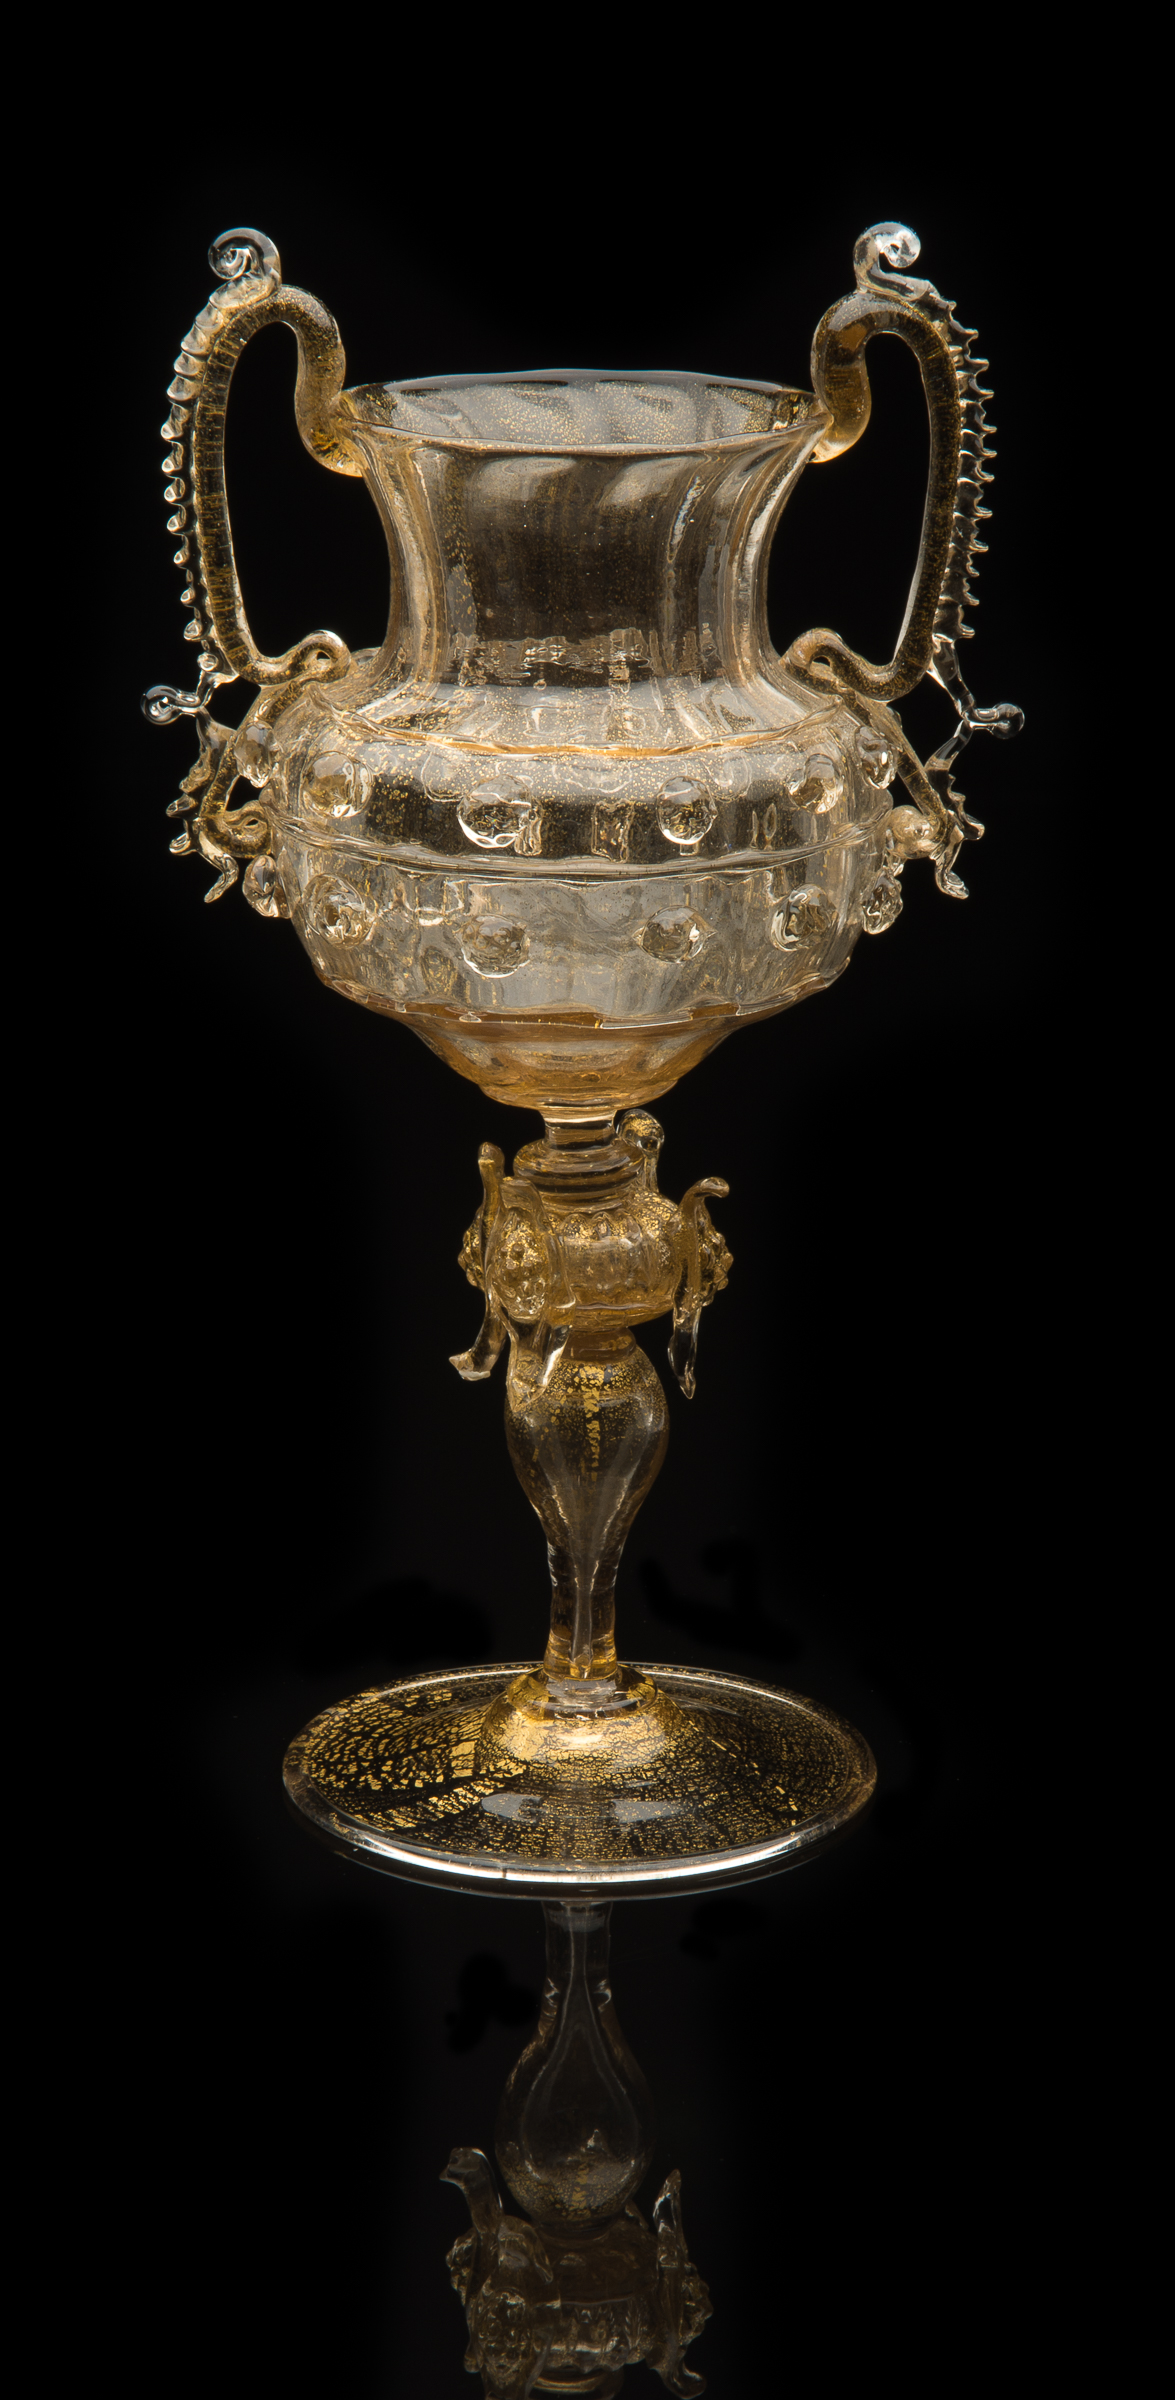  Salviati and Company,  Gold Aventurine Double-handled Goblet  (1890, glass, 7 11/16 inches), VV.702 